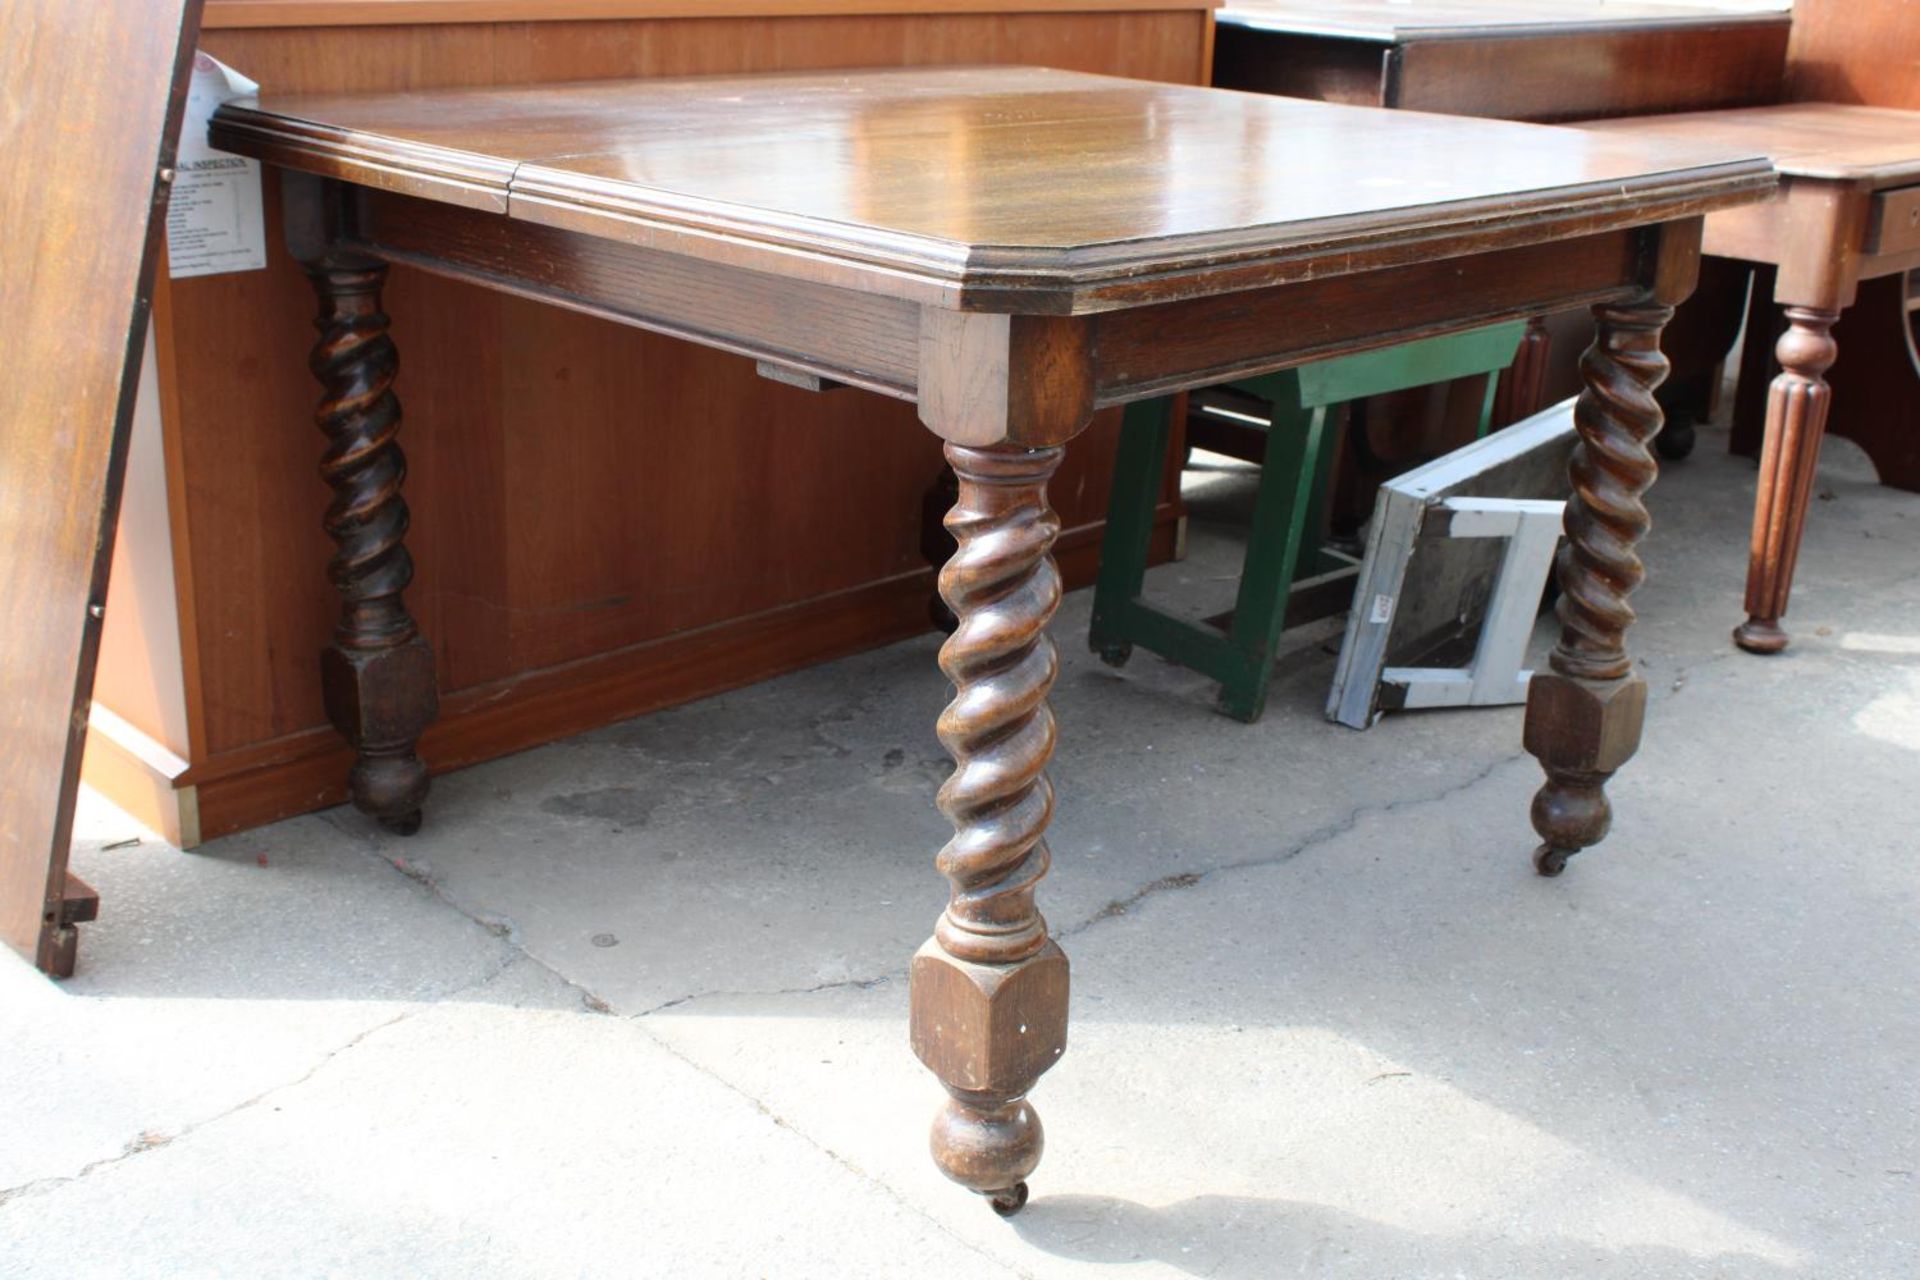 AN EARLY 20TH CENTURY OAK EXTENDING DINING TABLE ON BARLEY-TWIST LEGS WITH CANTED CORNERS, 41" - Image 2 of 3